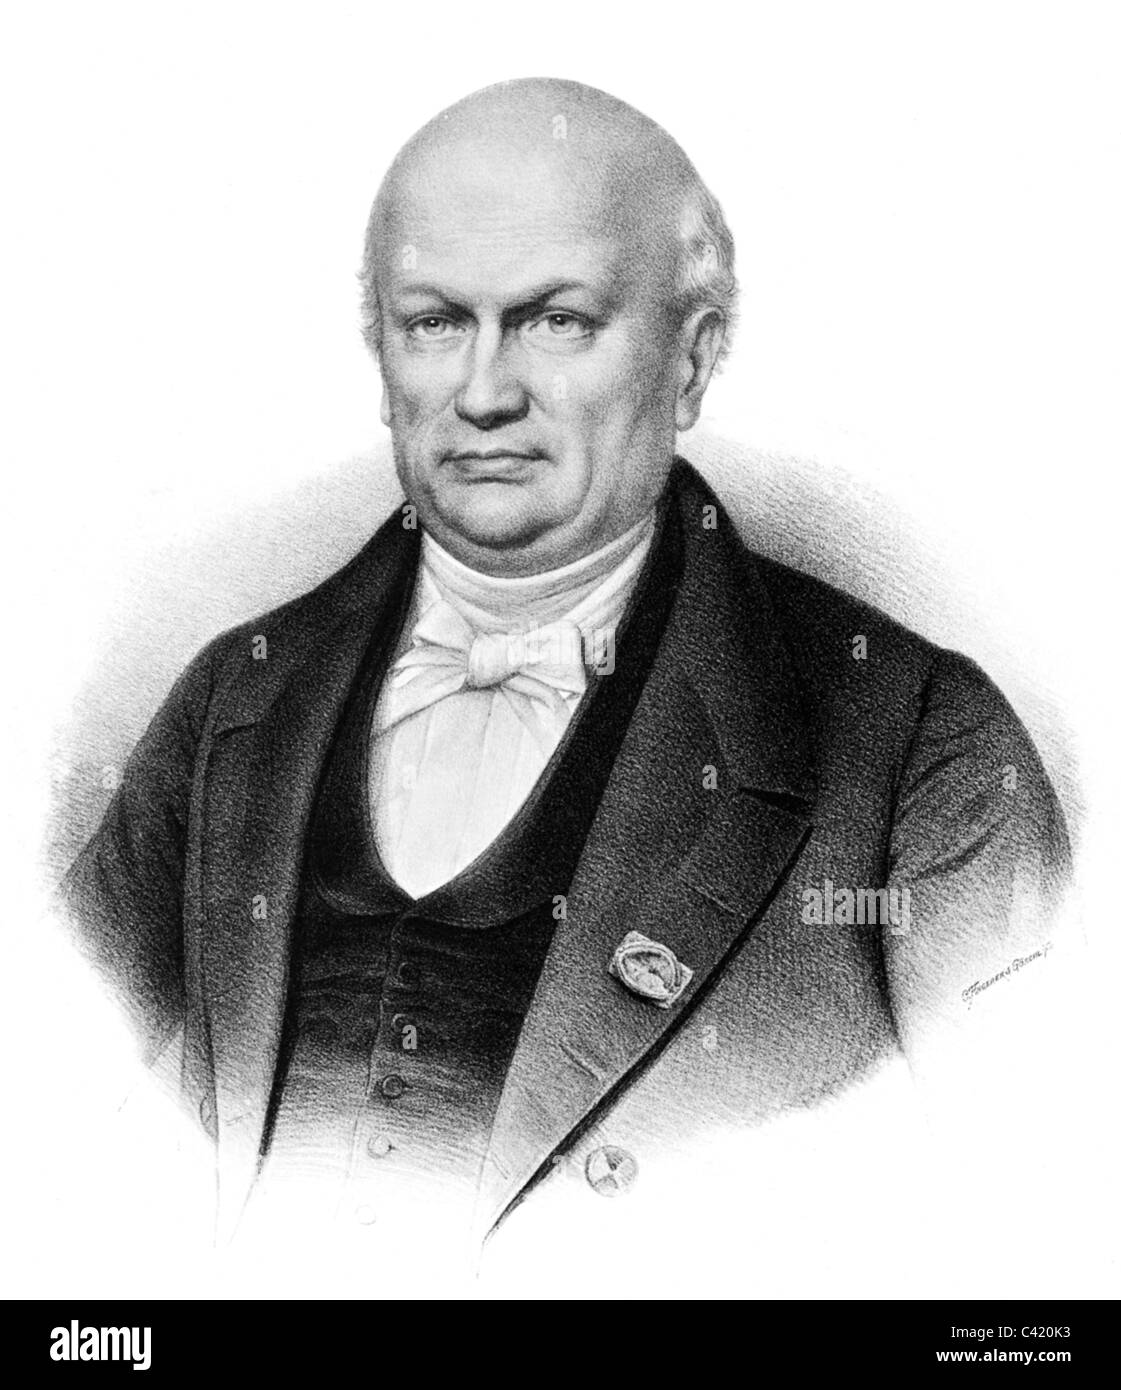 Saint-Hilaire, Etienne Geoffroy, 15.4.1772 - 19.6.1844, French zoologist, portrait, lithograph by Belliard, early 19th century, Stock Photo